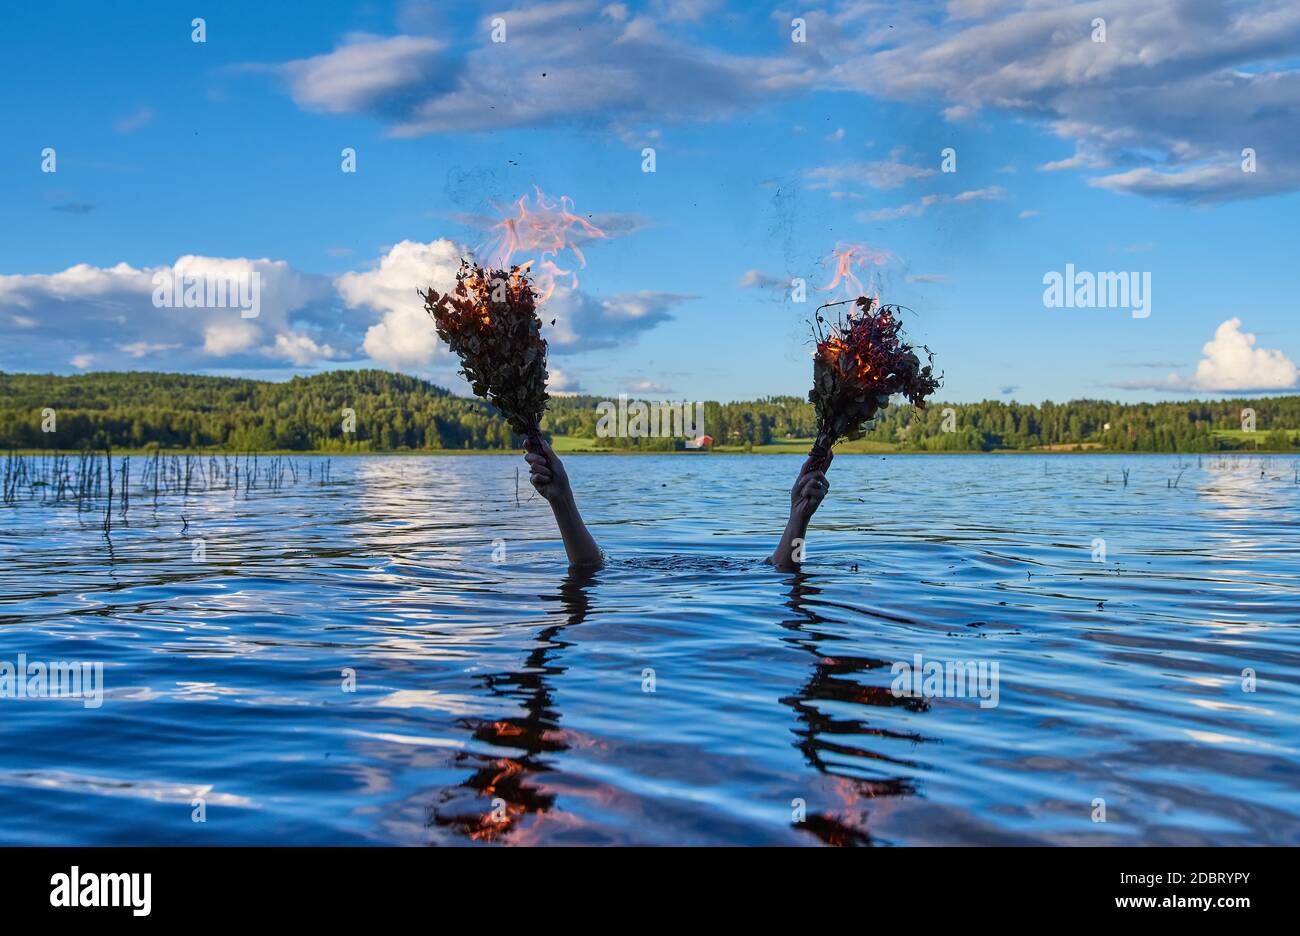 https://c8.alamy.com/comp/2DBRYPY/submerged-female-holds-two-burning-traditional-finnish-bath-whisks-with-her-hands-above-water-of-a-finnish-lake-on-calm-summer-evening-2DBRYPY.jpg